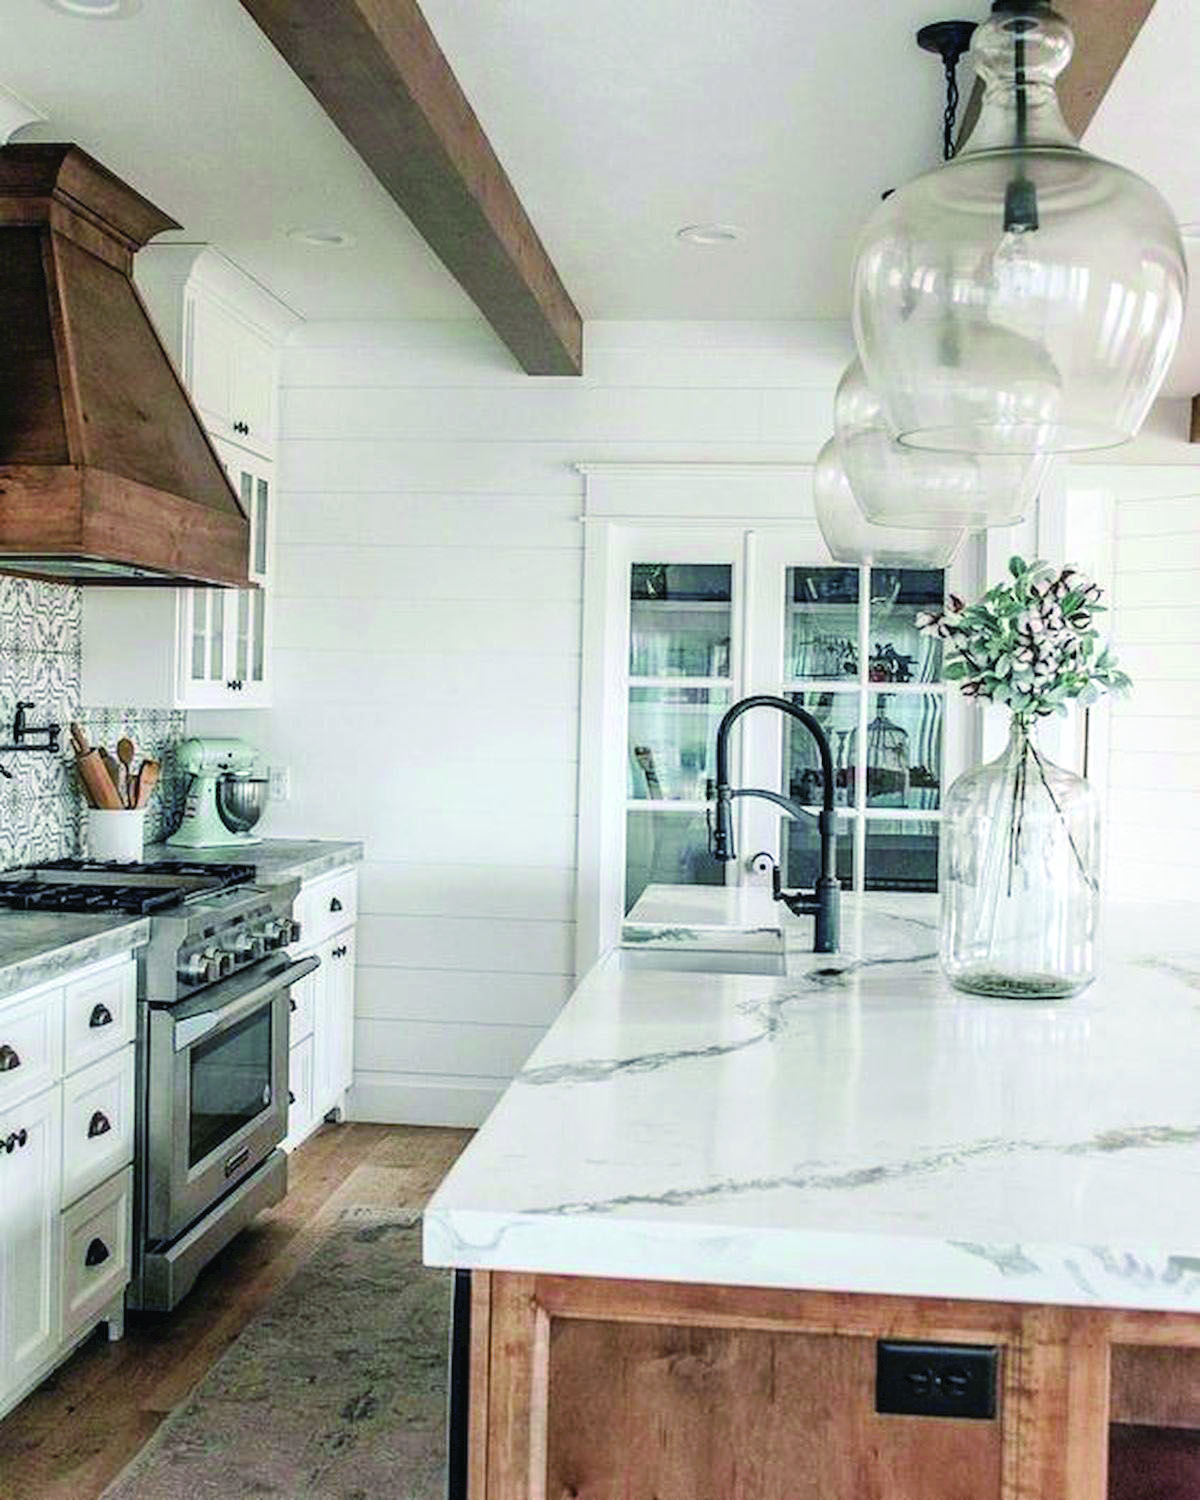 15 Farmhouse Kitchen Decor Ideas For A Cozy And Rustic Charm